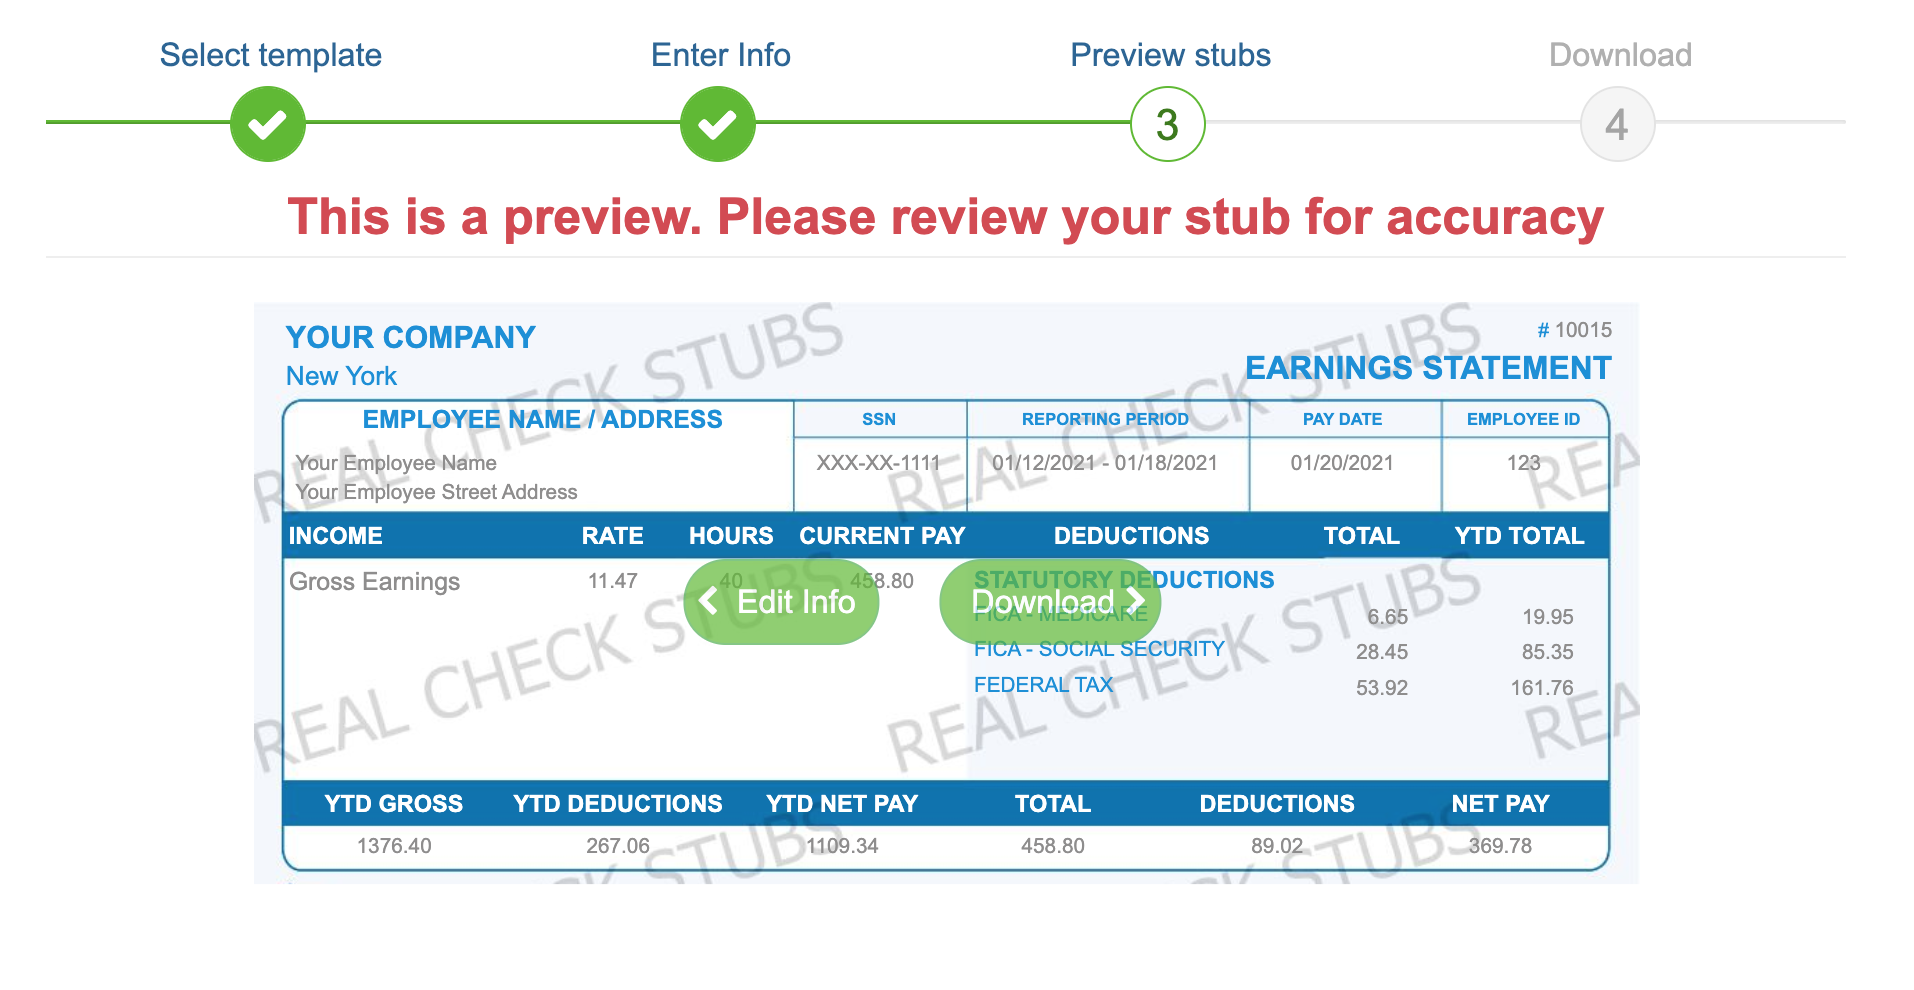 Review your stub to generate accurate payroll